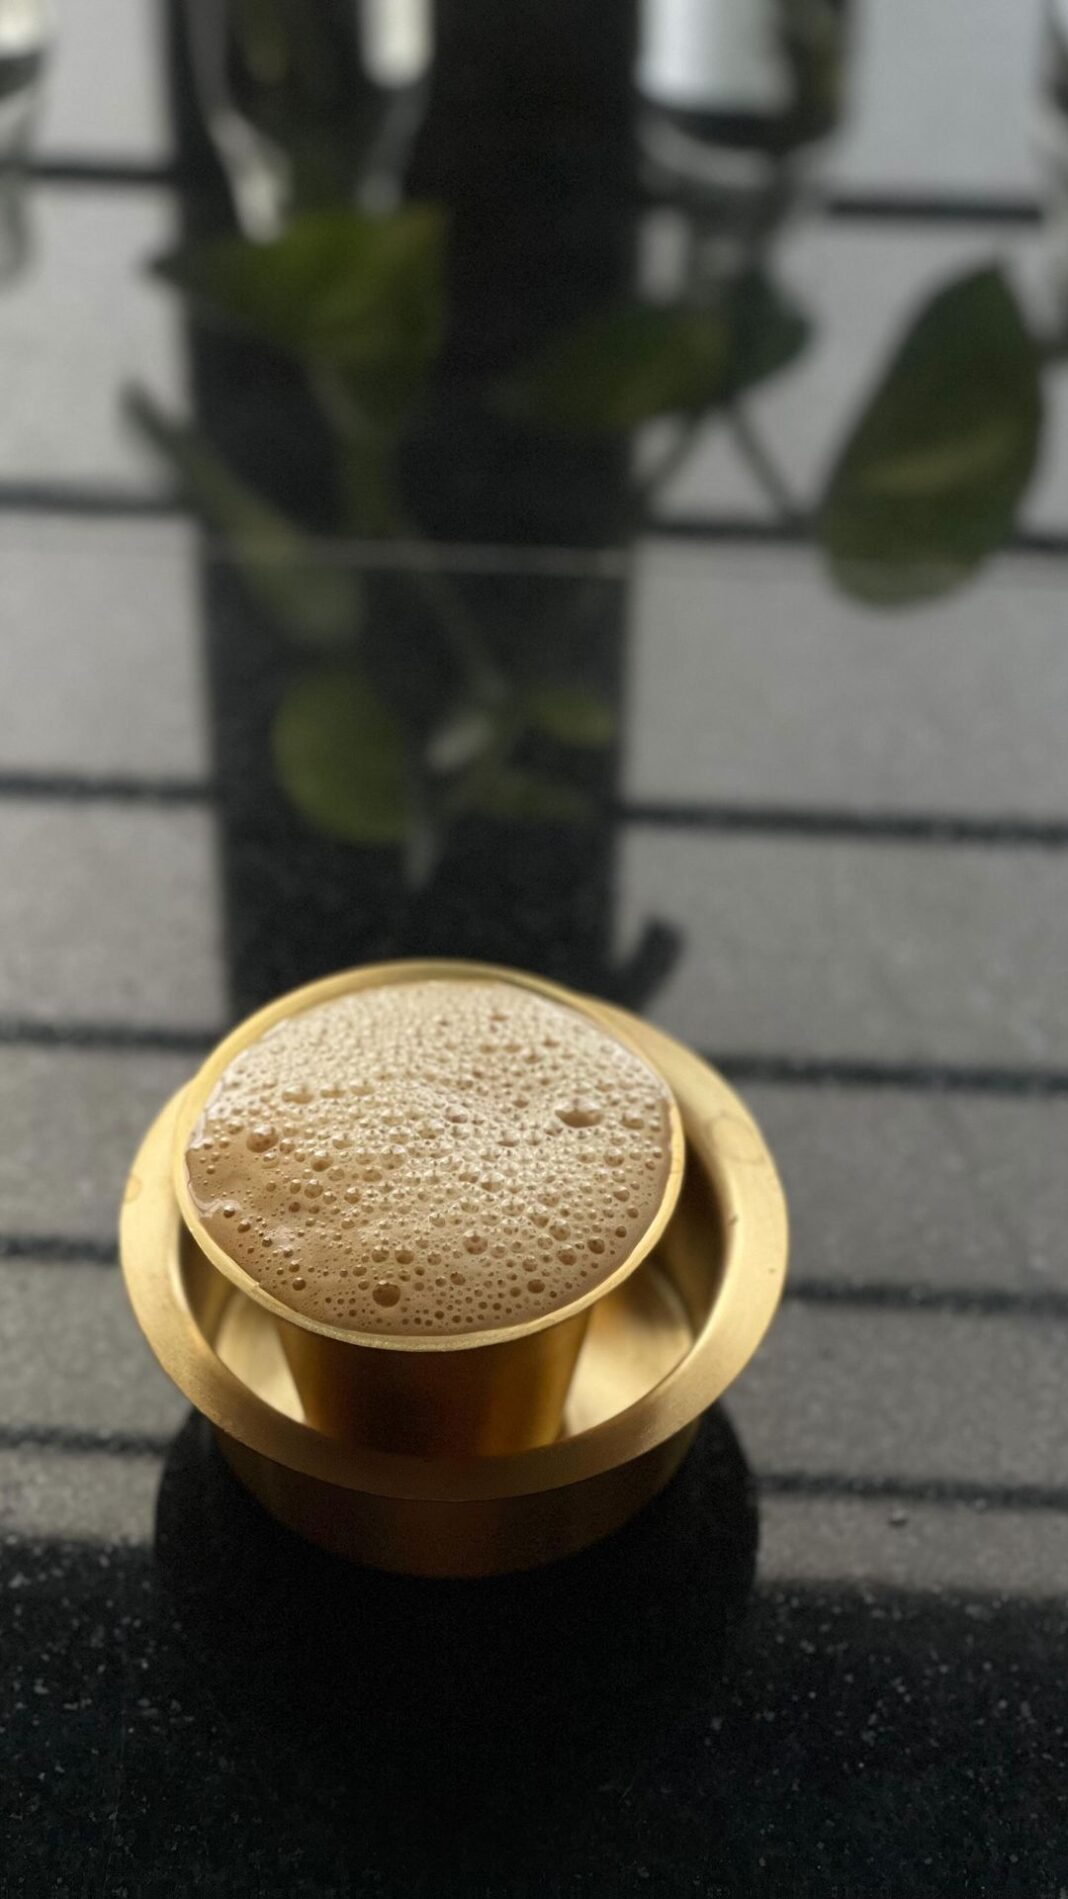 Anumol Instagram - Capturing the aroma of my coffee journey! ☕️ Here’s a glimpse of my first attempt at making filter coffee.🧿 thank you @macaron_gal for the motivation ❤️🫂 #CoffeeLove #CoffeeJourney #FilterCoffee #BrewingAdventure #CoffeeNovice #CoffeeLover #CoffeeTime #CoffeeAddict #CoffeeObsessed #Coffeeholic #HomeBrewed #CoffeeExperience #CoffeeCulture #CoffeeArt #CoffeeMoments #CoffeeBreak #CoffeeVibes #MorningCup #CoffeeGasm #CoffeeOfTheDay #CoffeeInspiration